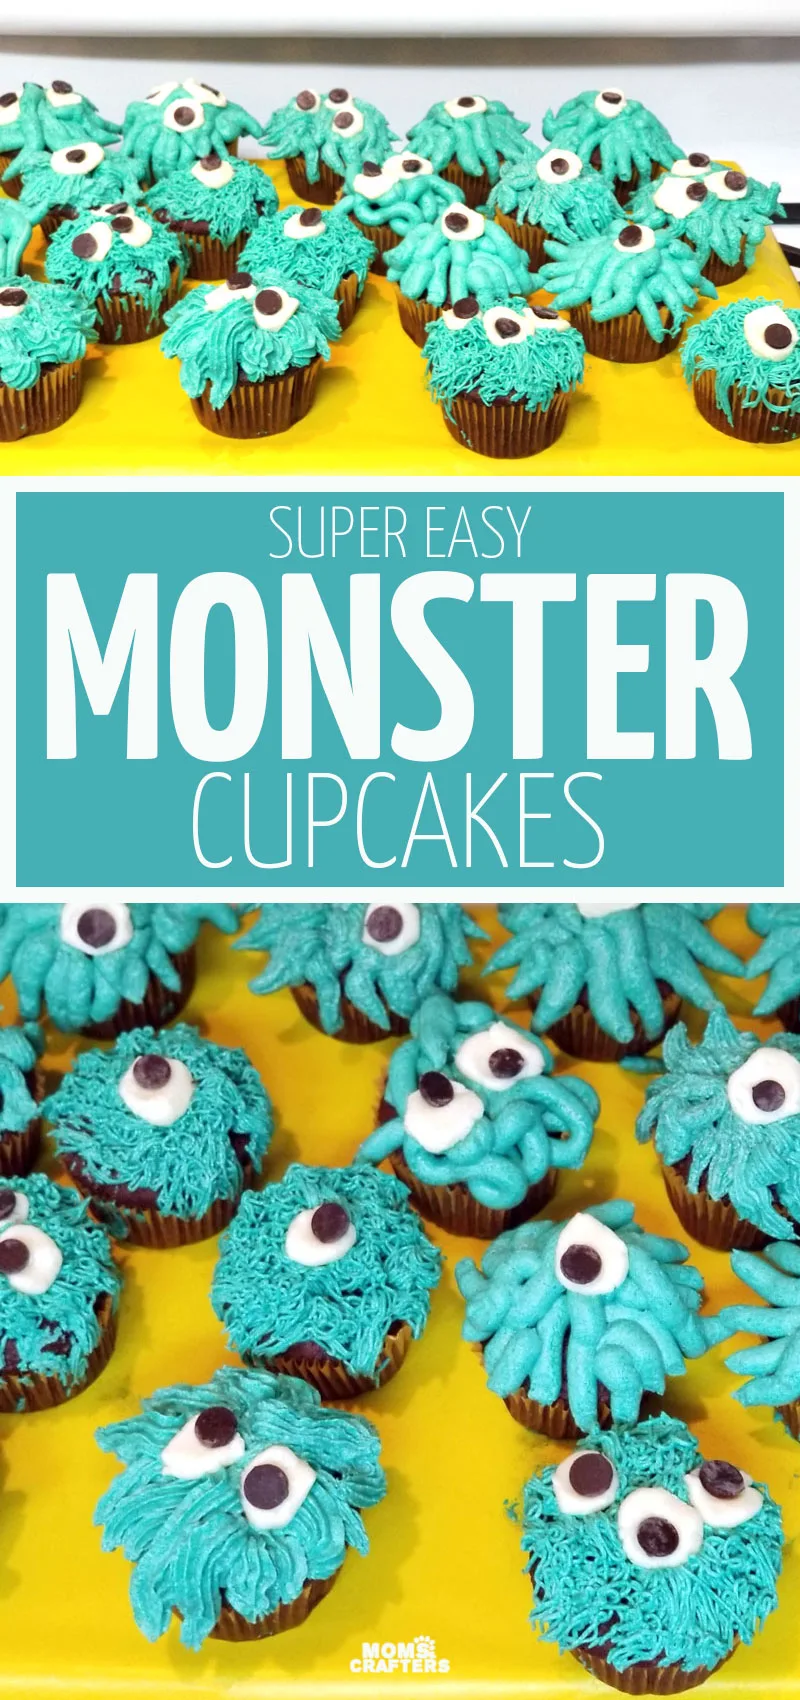 Click for monster birthday party food ideas including these adorable monster cupcakes that are easy for beginners to make!